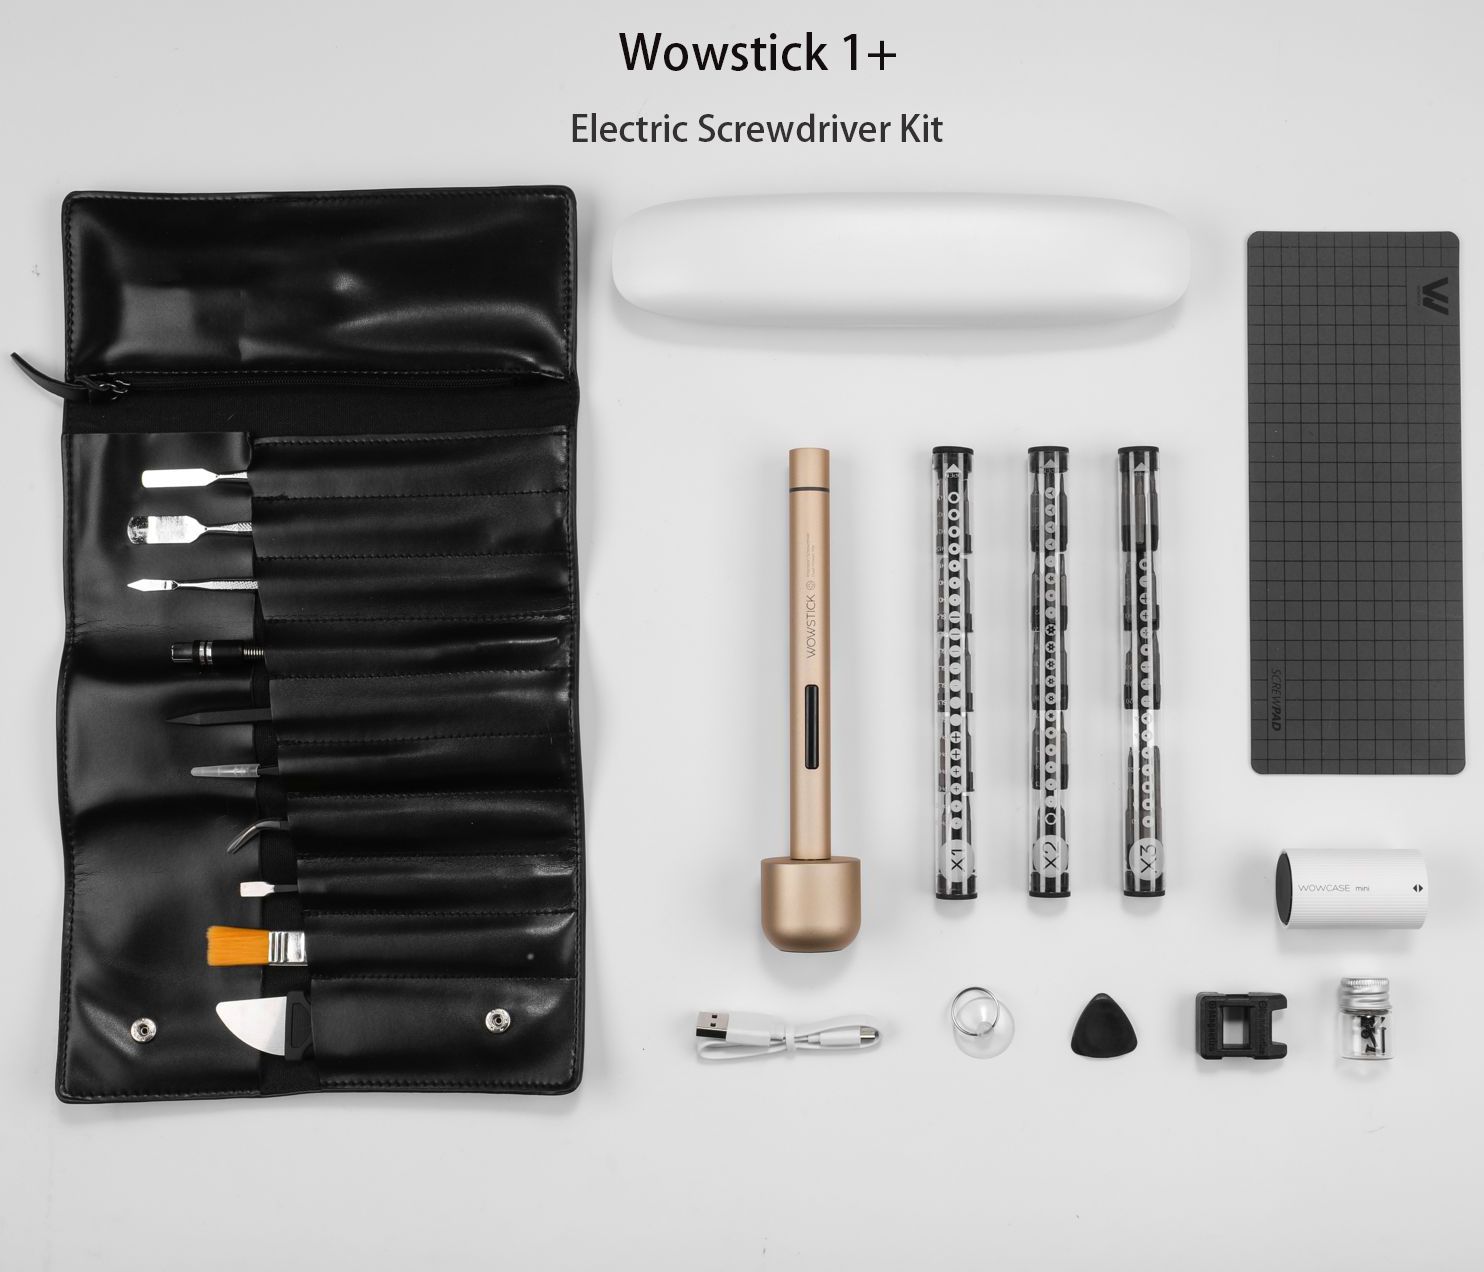 Wowstick-1-Precision-Electric-Screwdriver-Set-Cordless-Chargeable-DIY-Repair-Tools-Kit-1365110